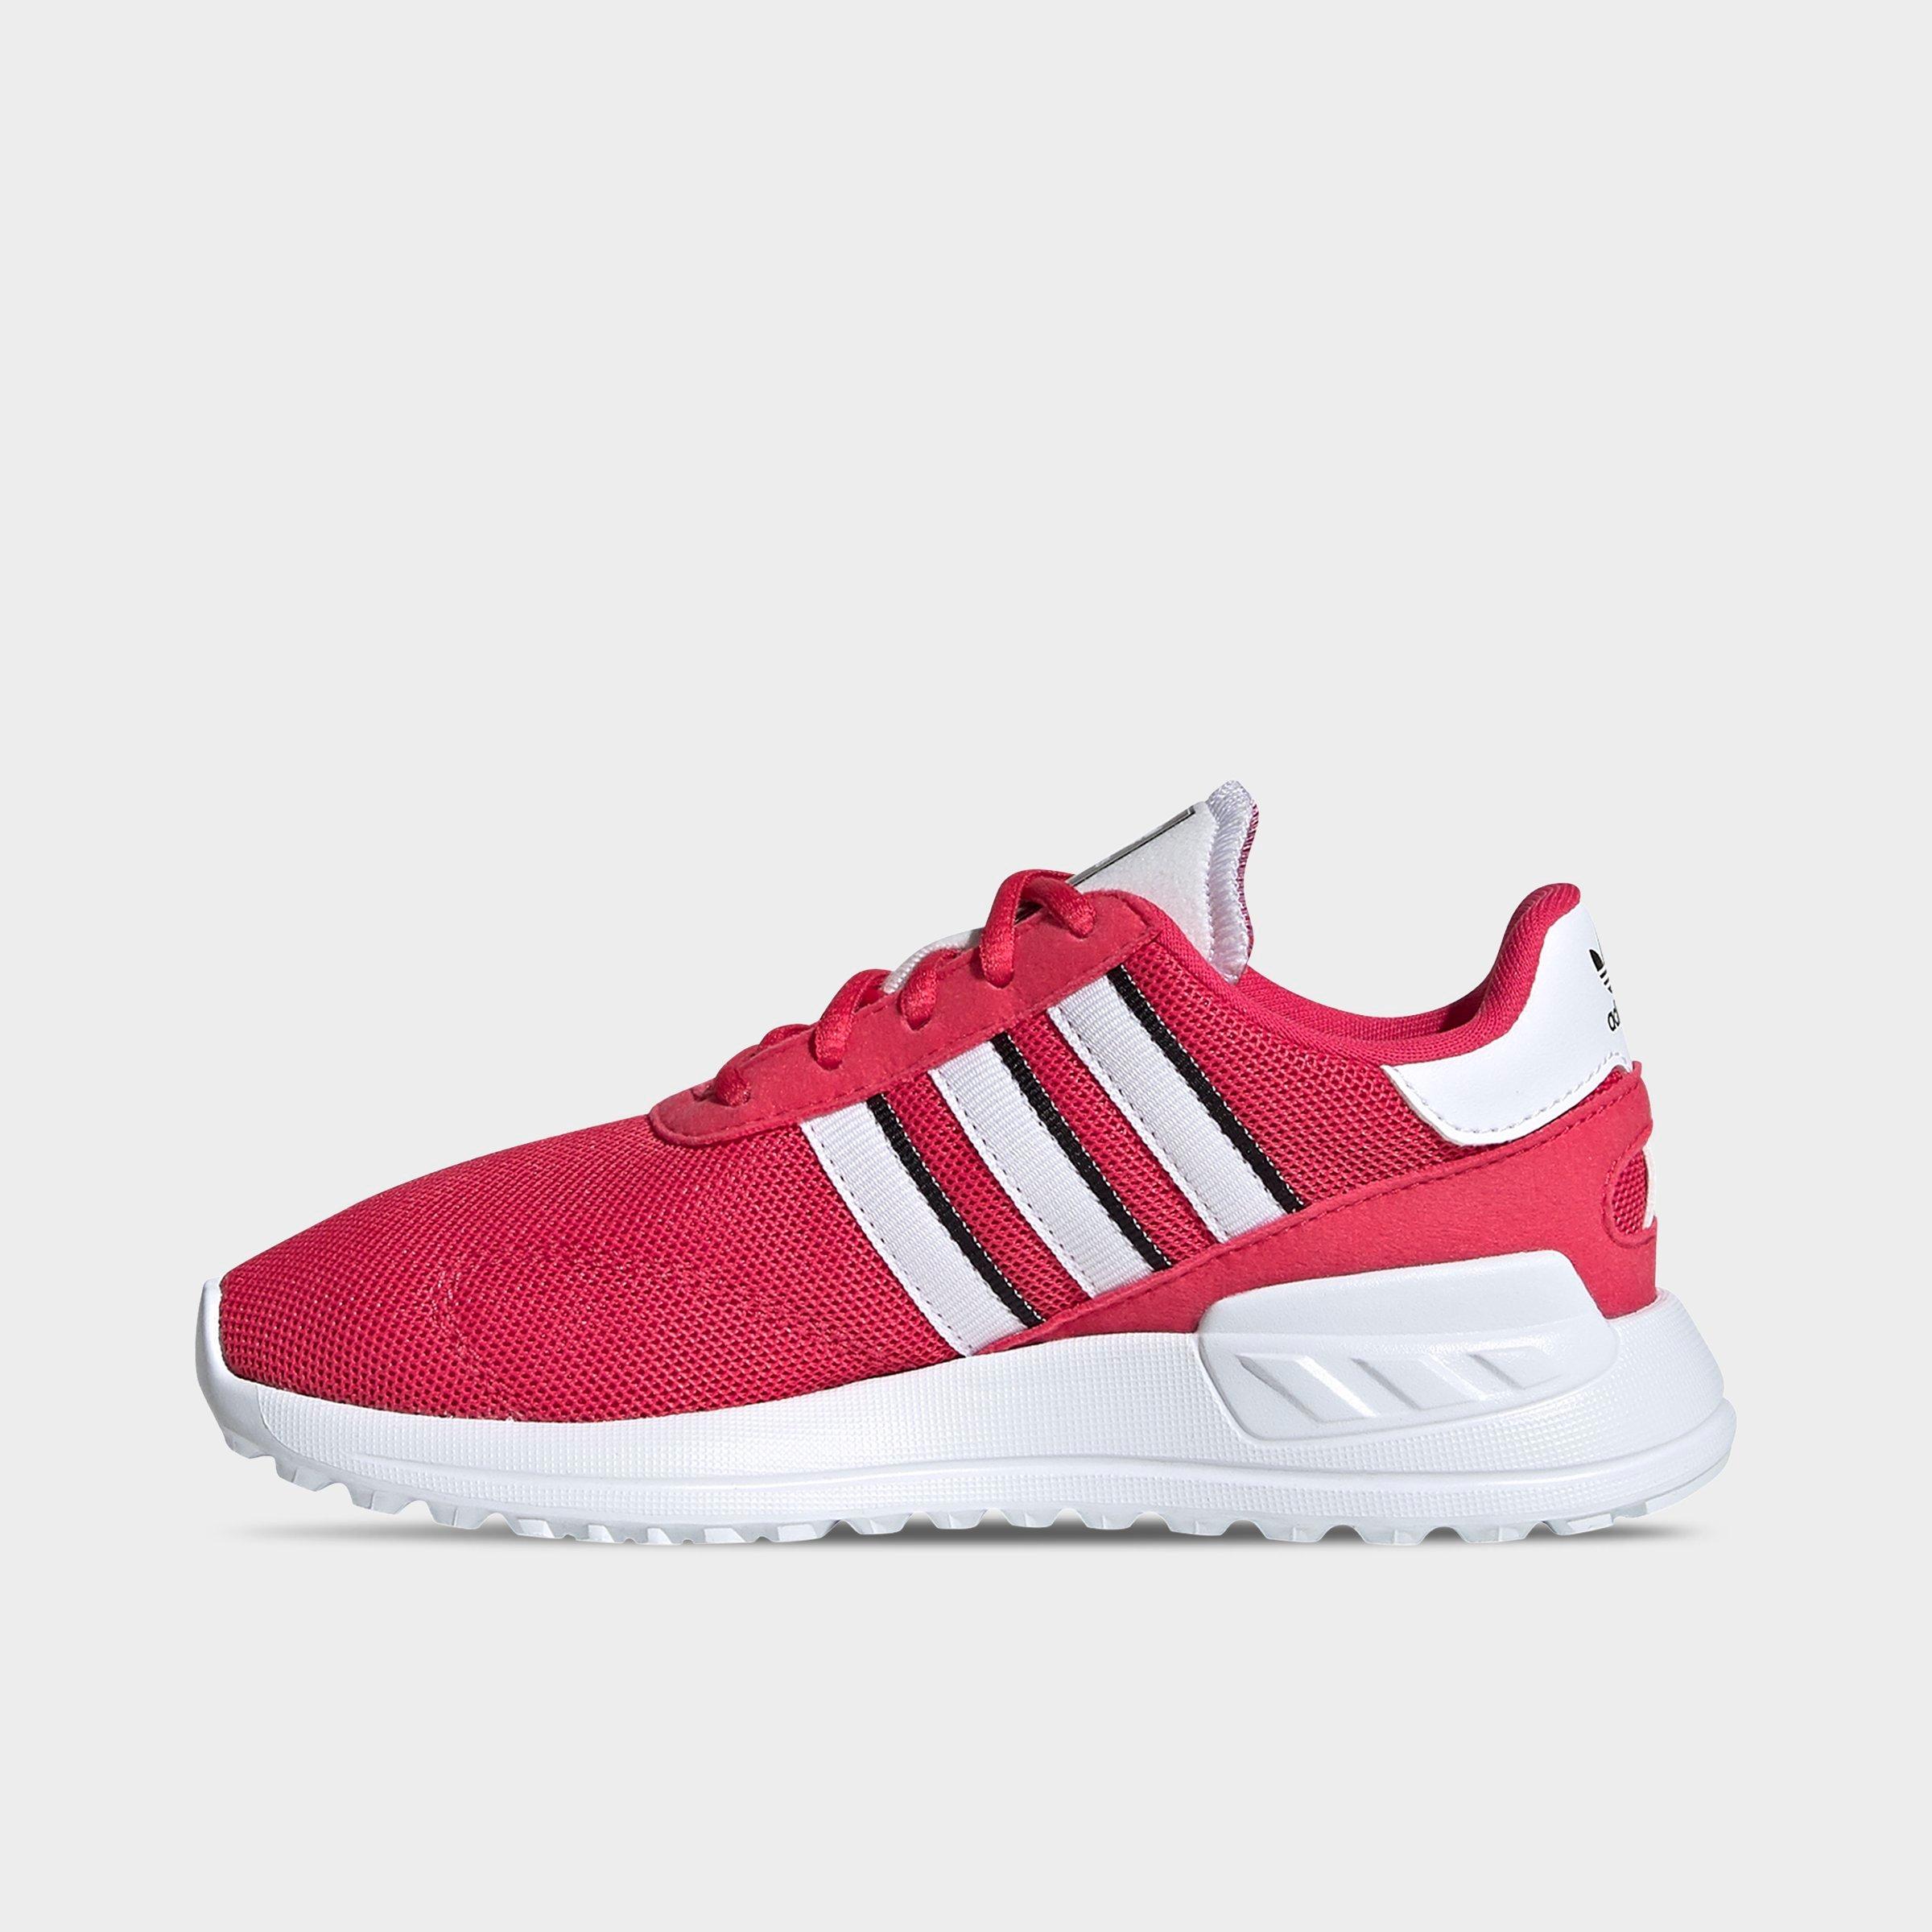 jd pink adidas trainers